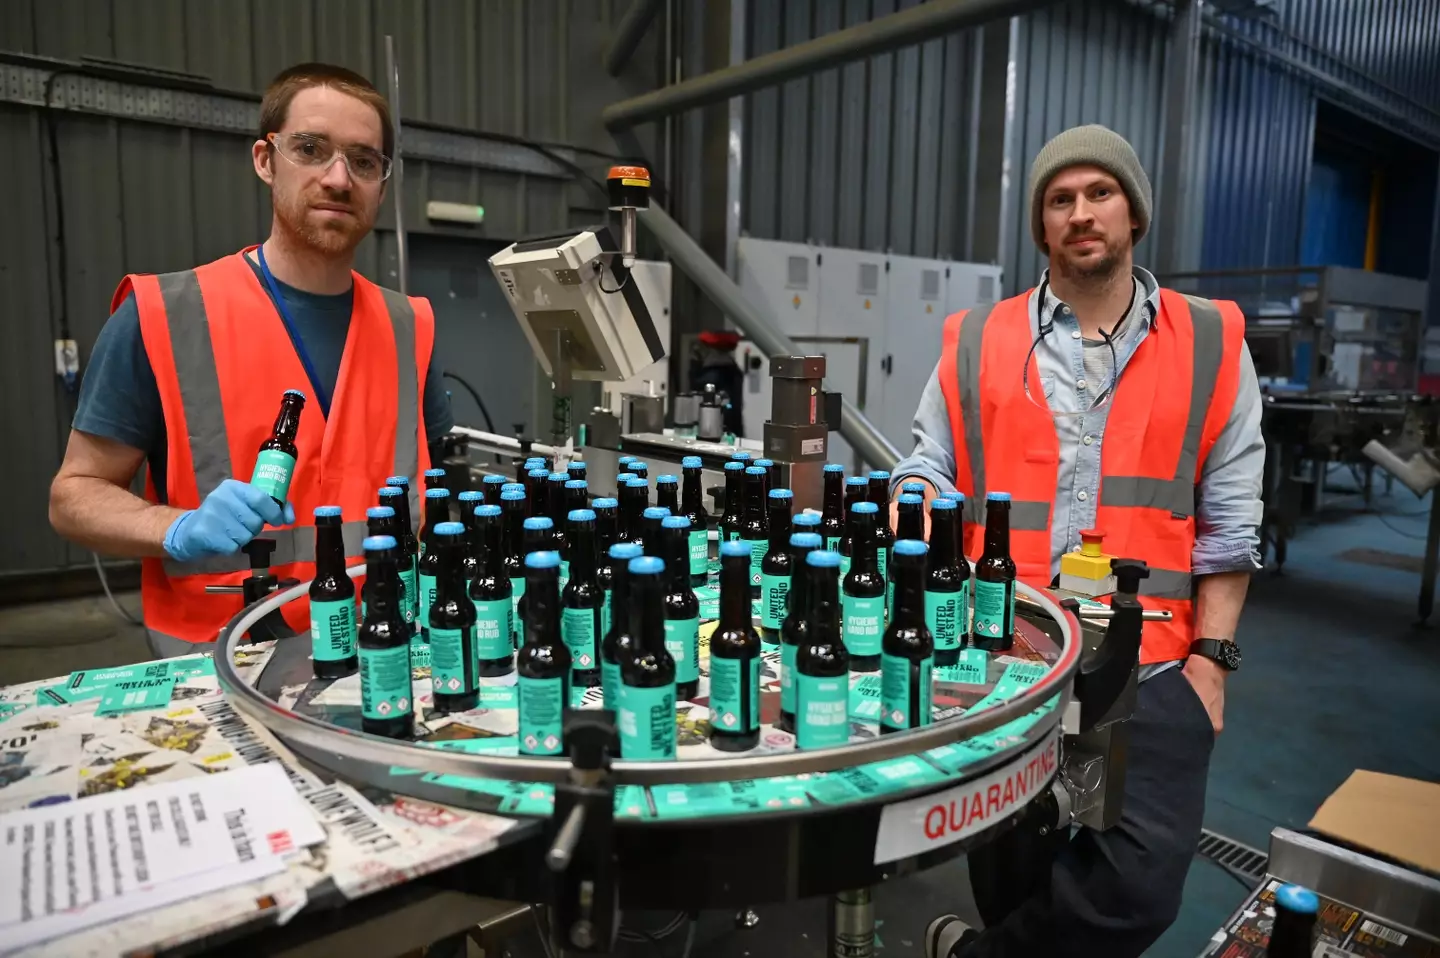 Martin Dickie and James Watt founded BrewDog. (Jeff J Mitchell/Getty Images)